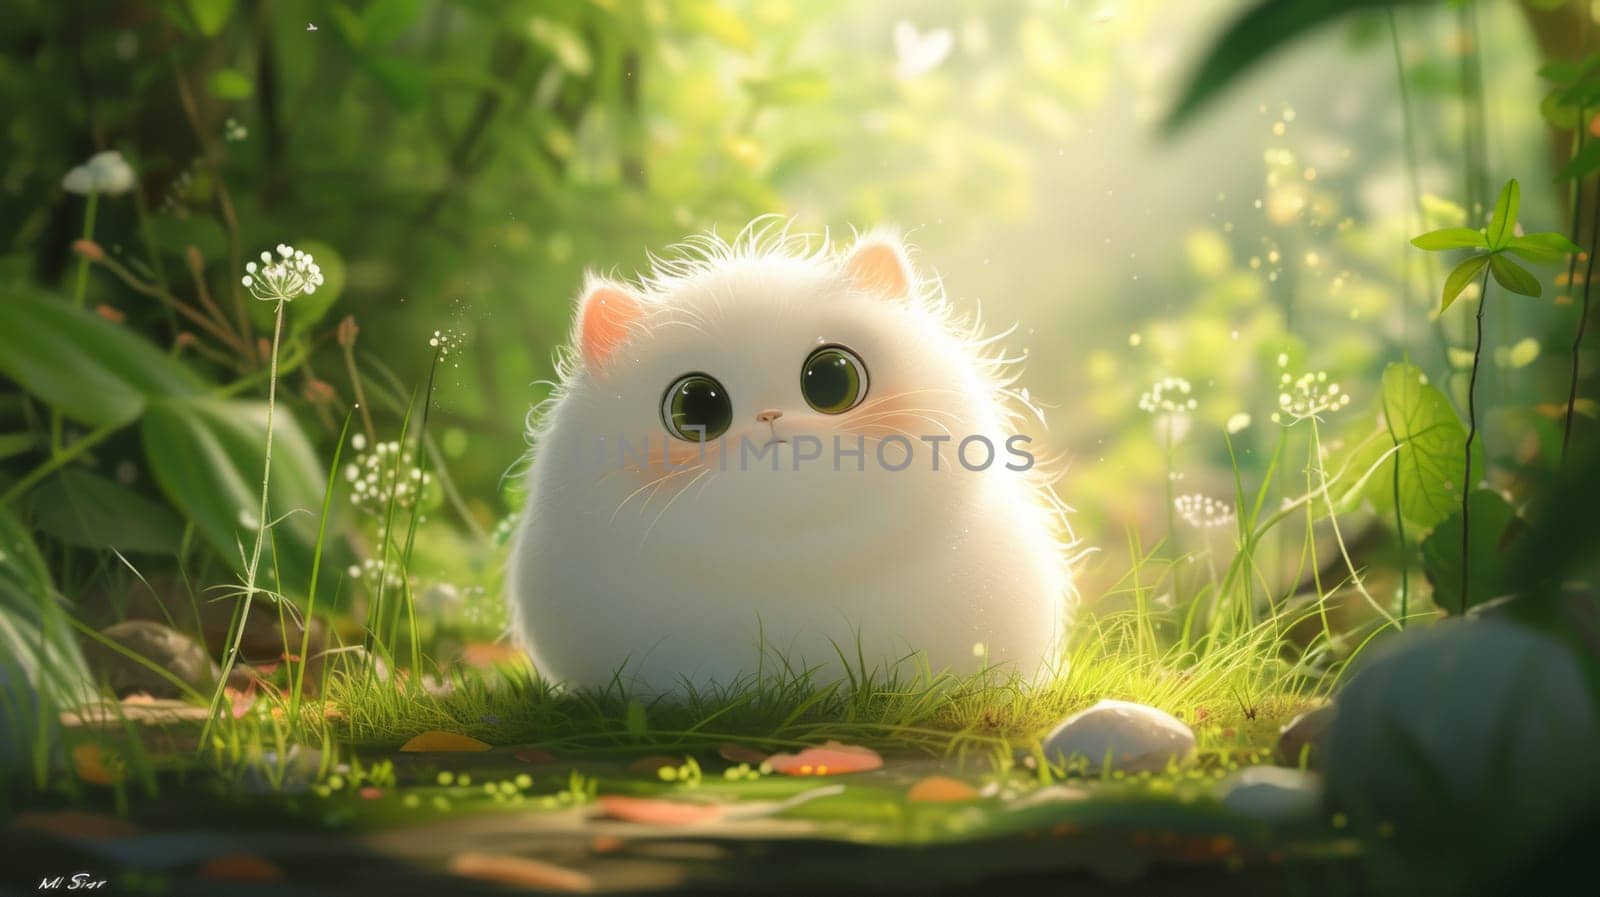 A white fluffy cat sitting in the grass with big eyes